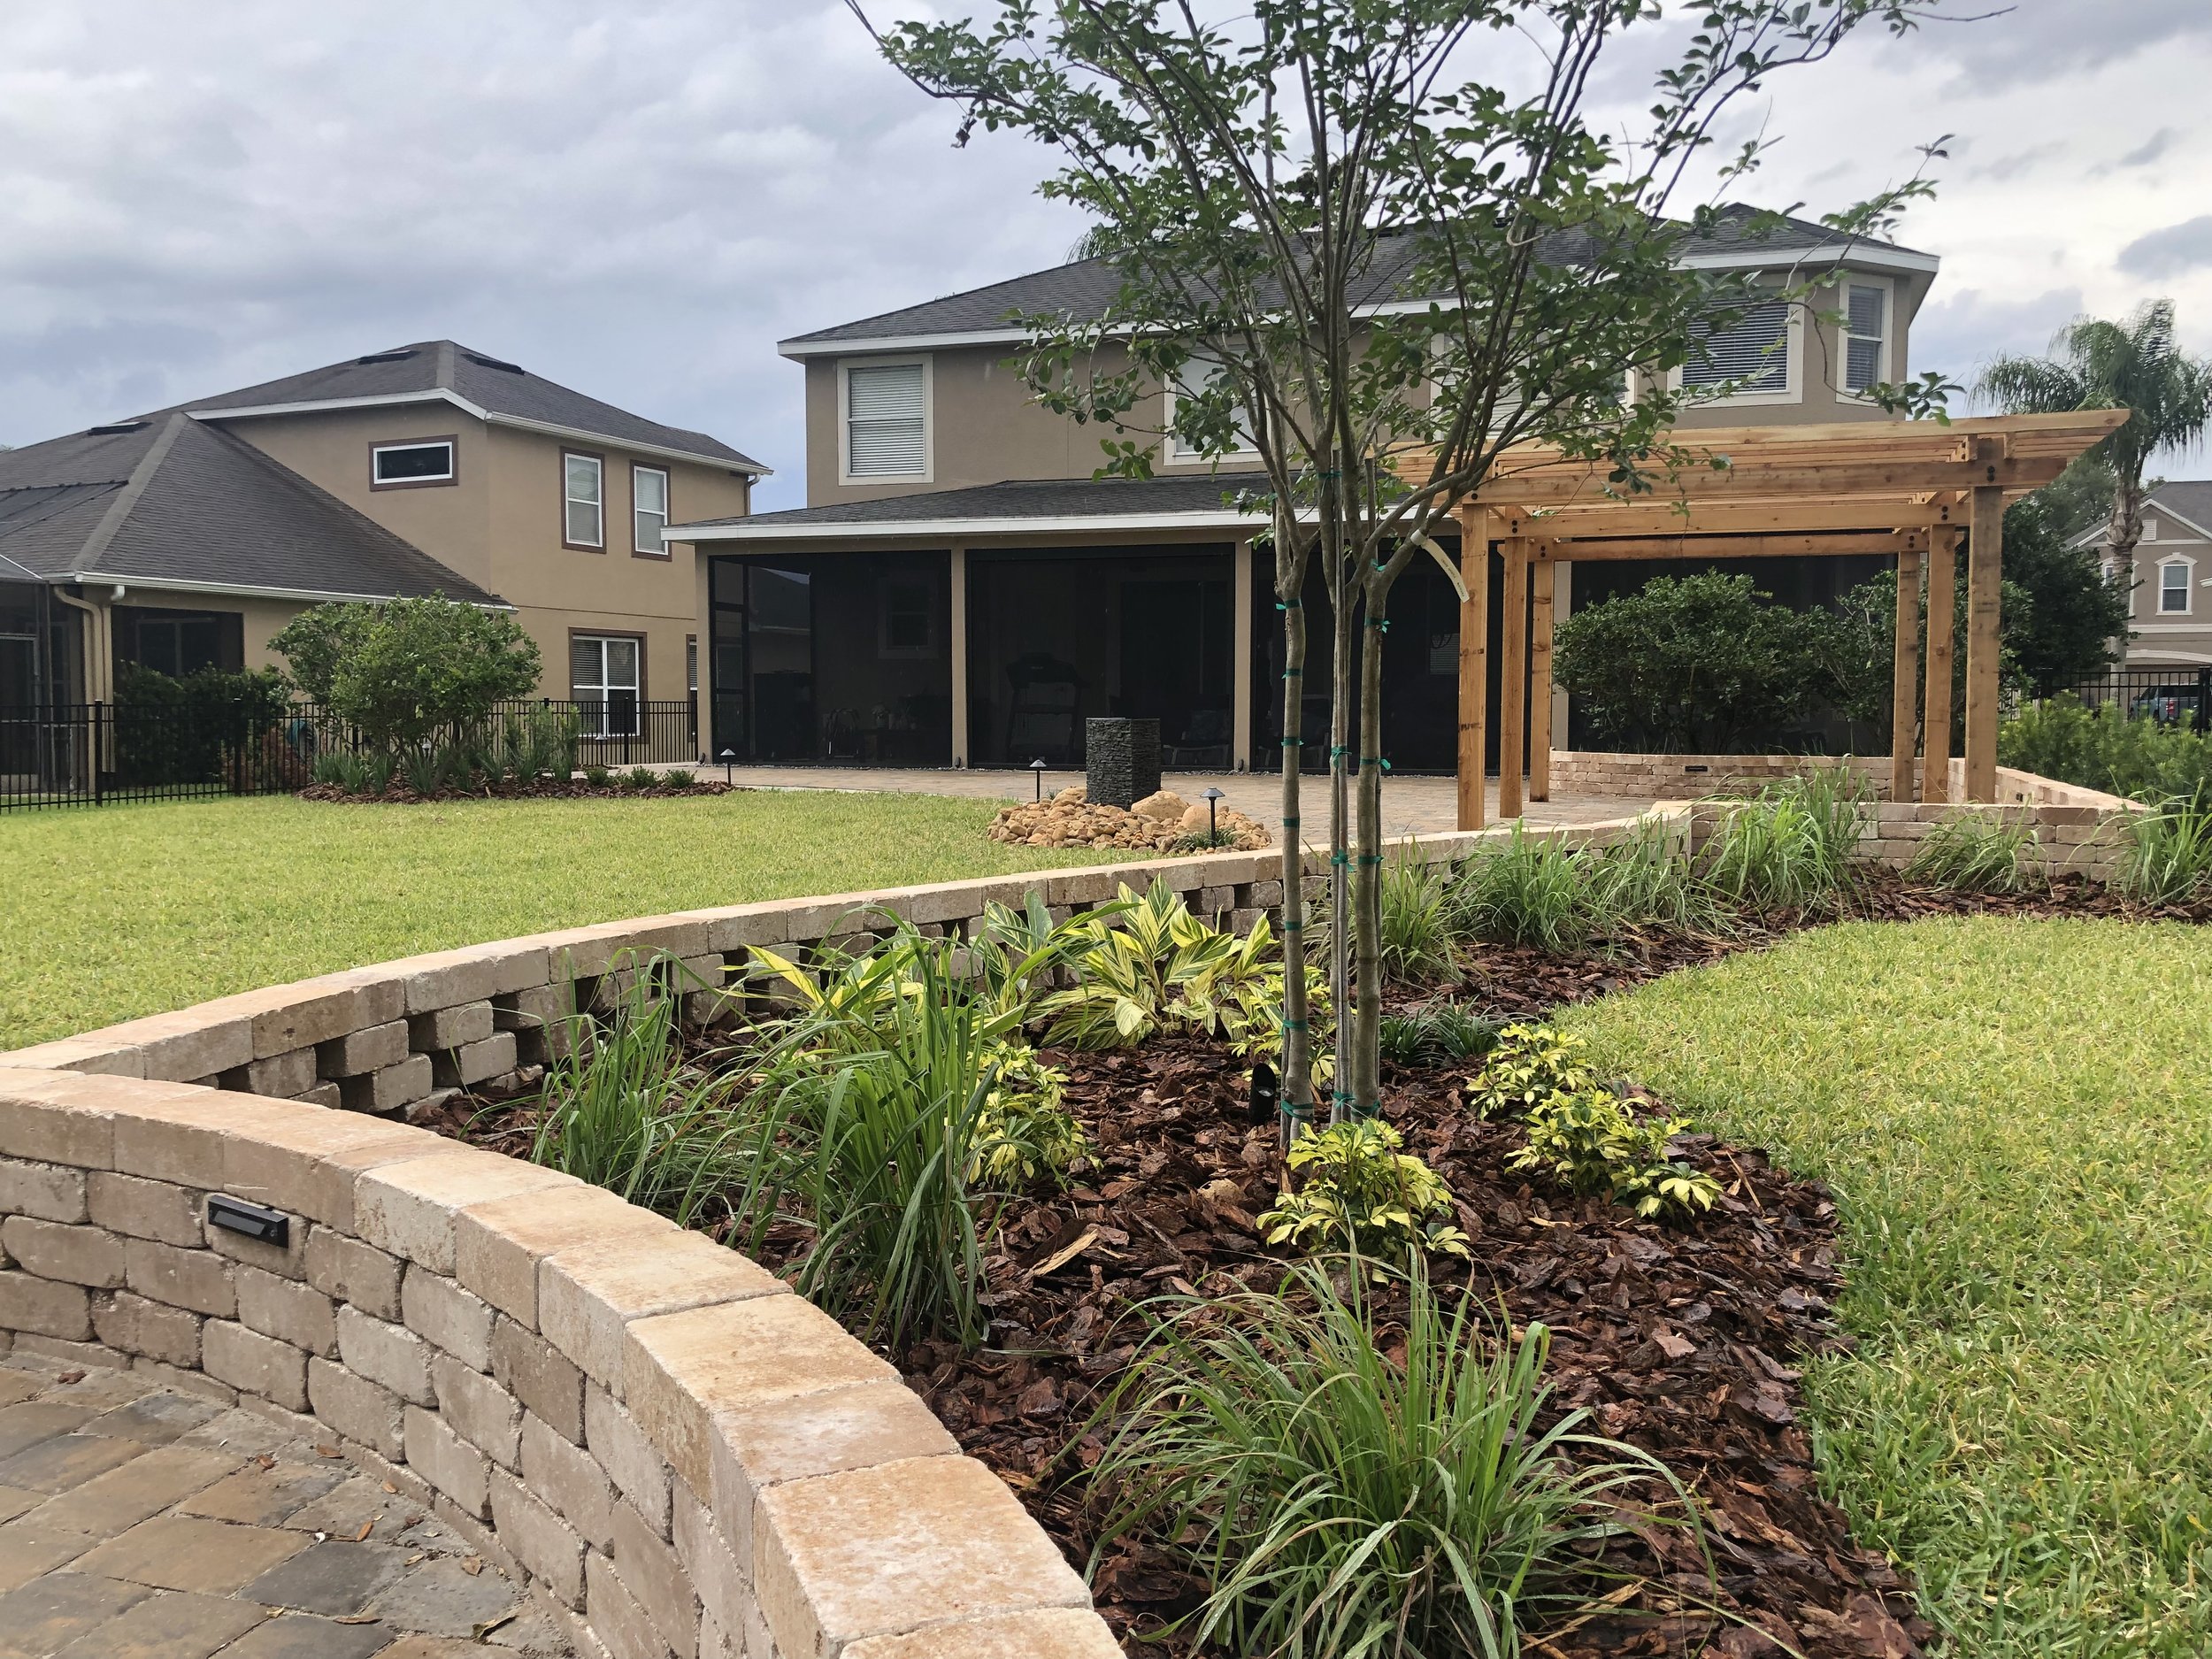 landscape_design_earthwise_horticultural_services_orlando_longwood_sanford_winter_springs_pergola_pavers_retaining_wall_florida.jpg